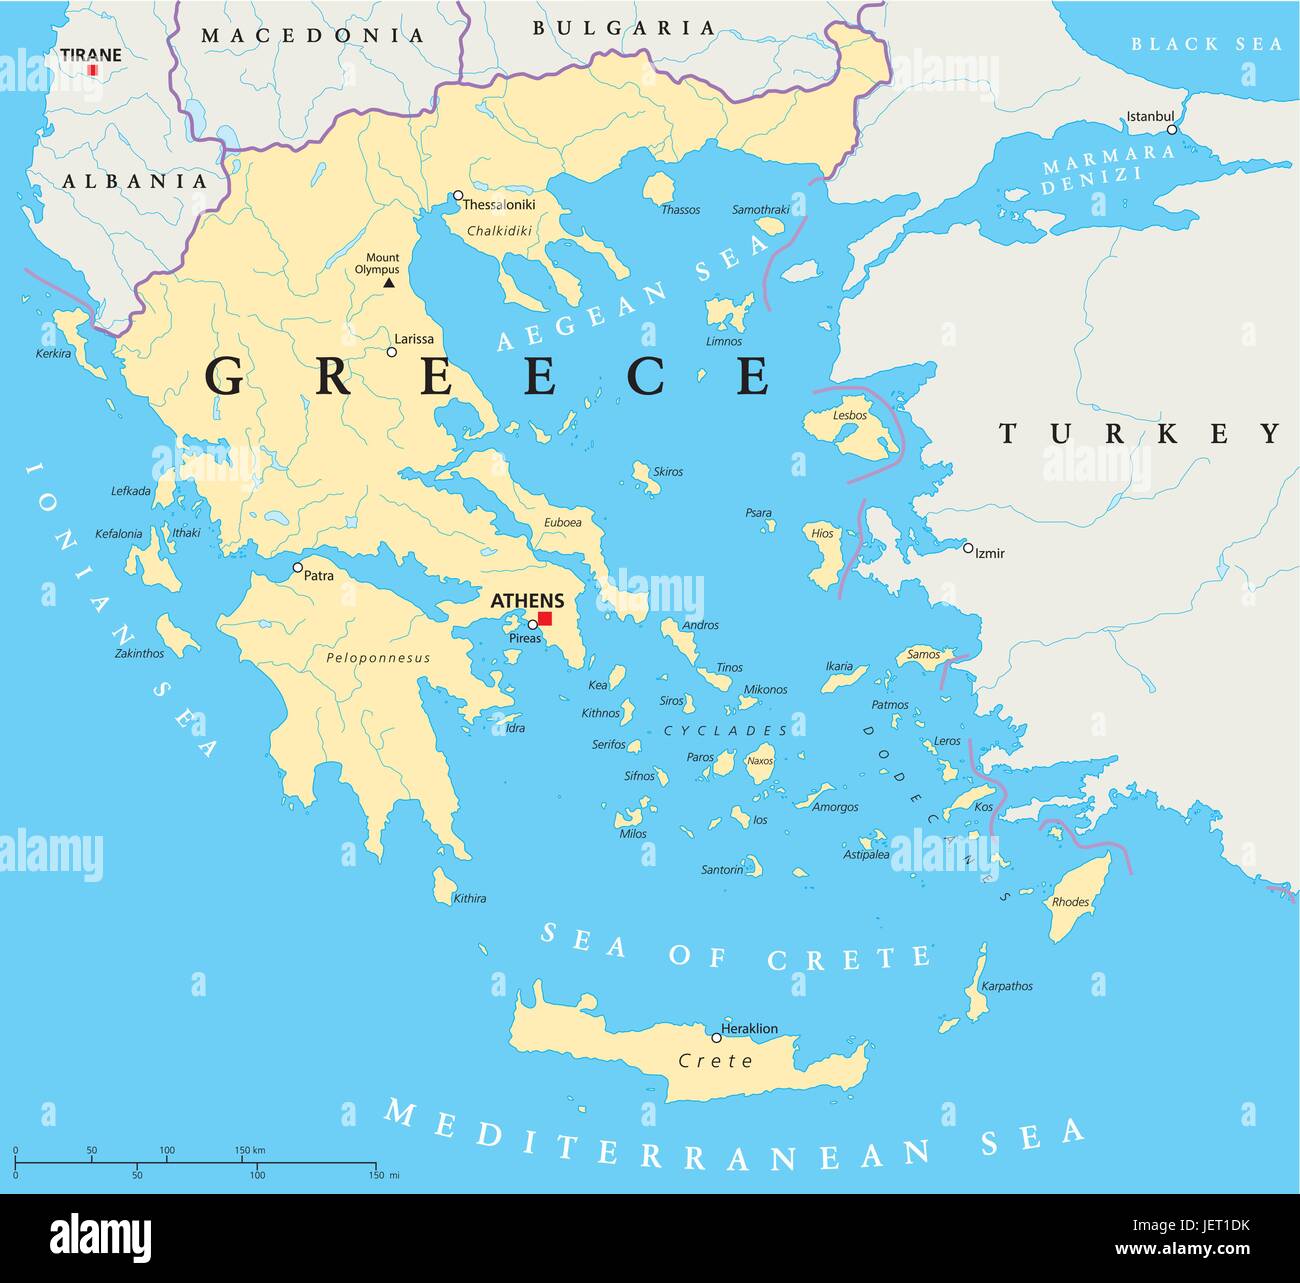 political, greece, greek, athens, map, atlas, map of the world Stock